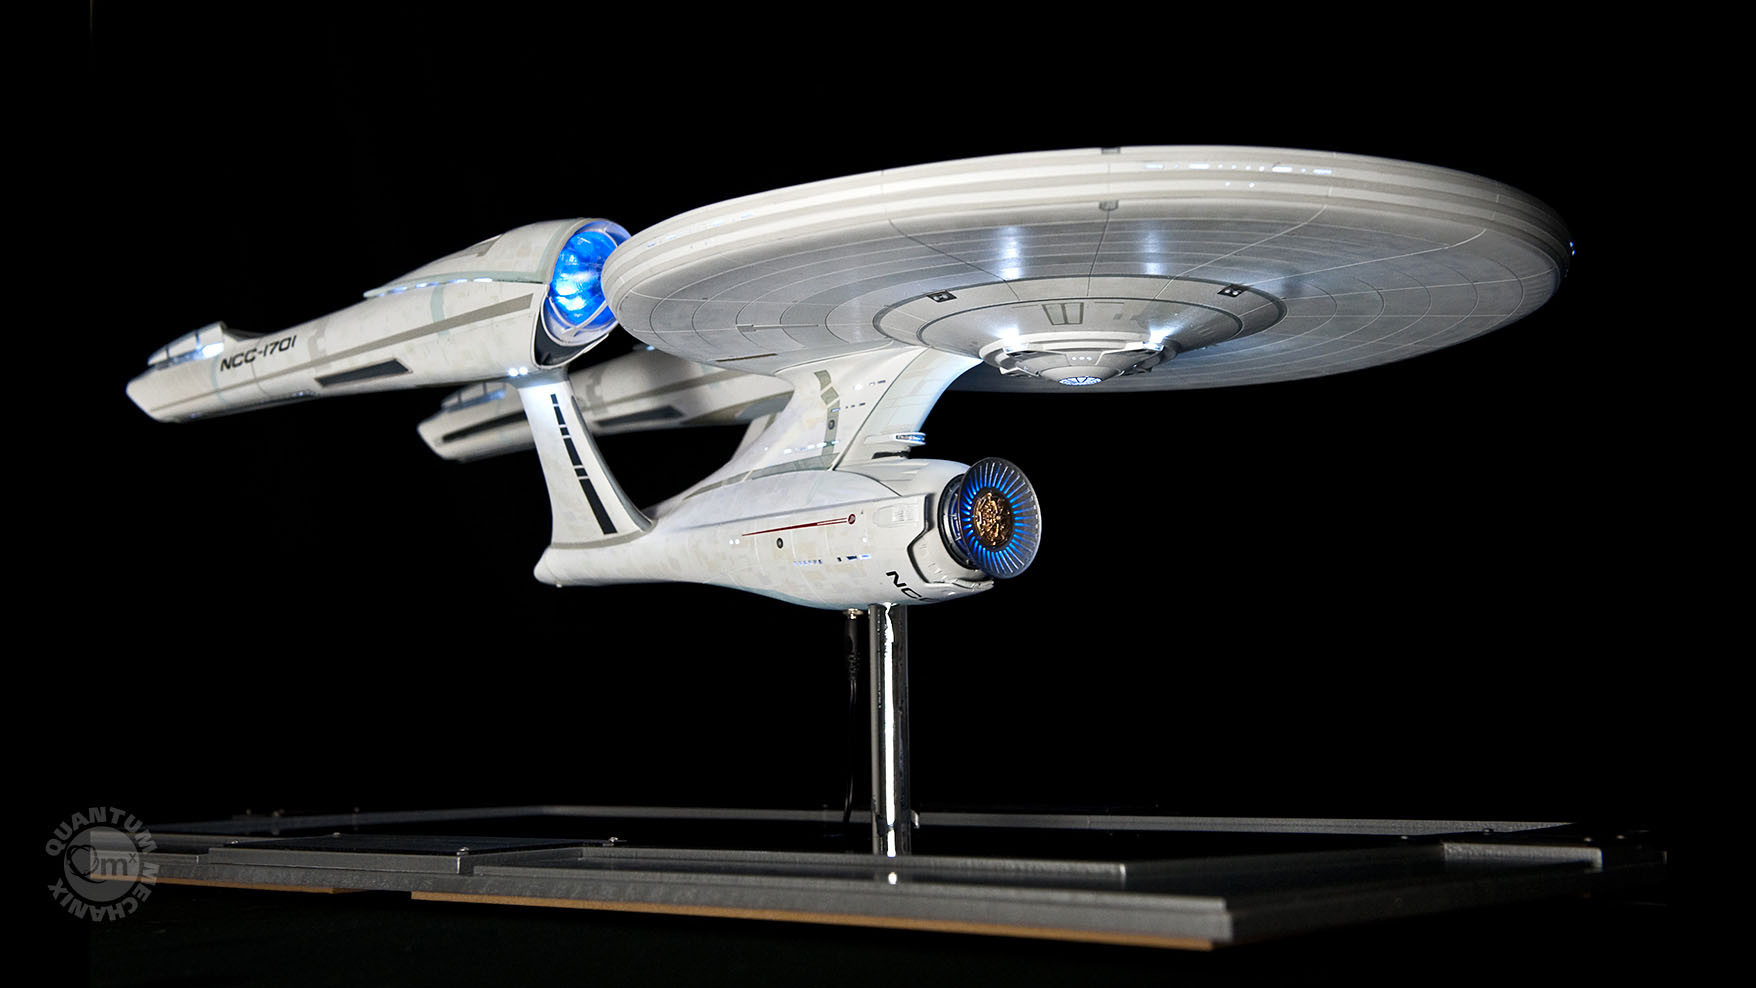 Try Not To Drool Over This Exquisite $9700 Replica Of The USS Enterprise